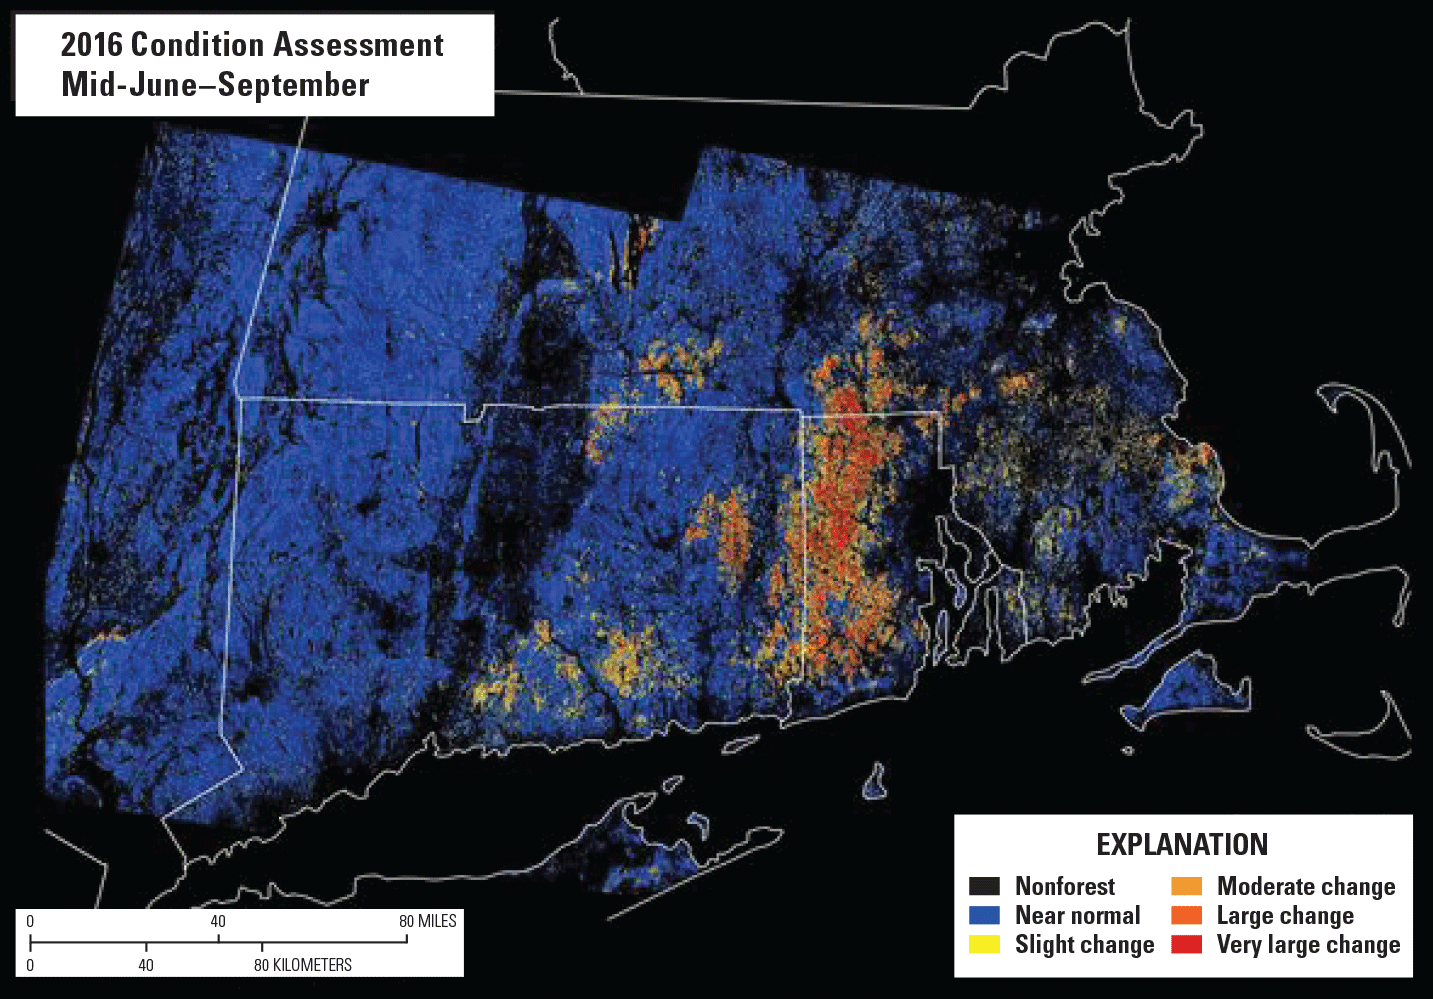 Image showing a dense area affected by a spongy moth outbreak in New England.